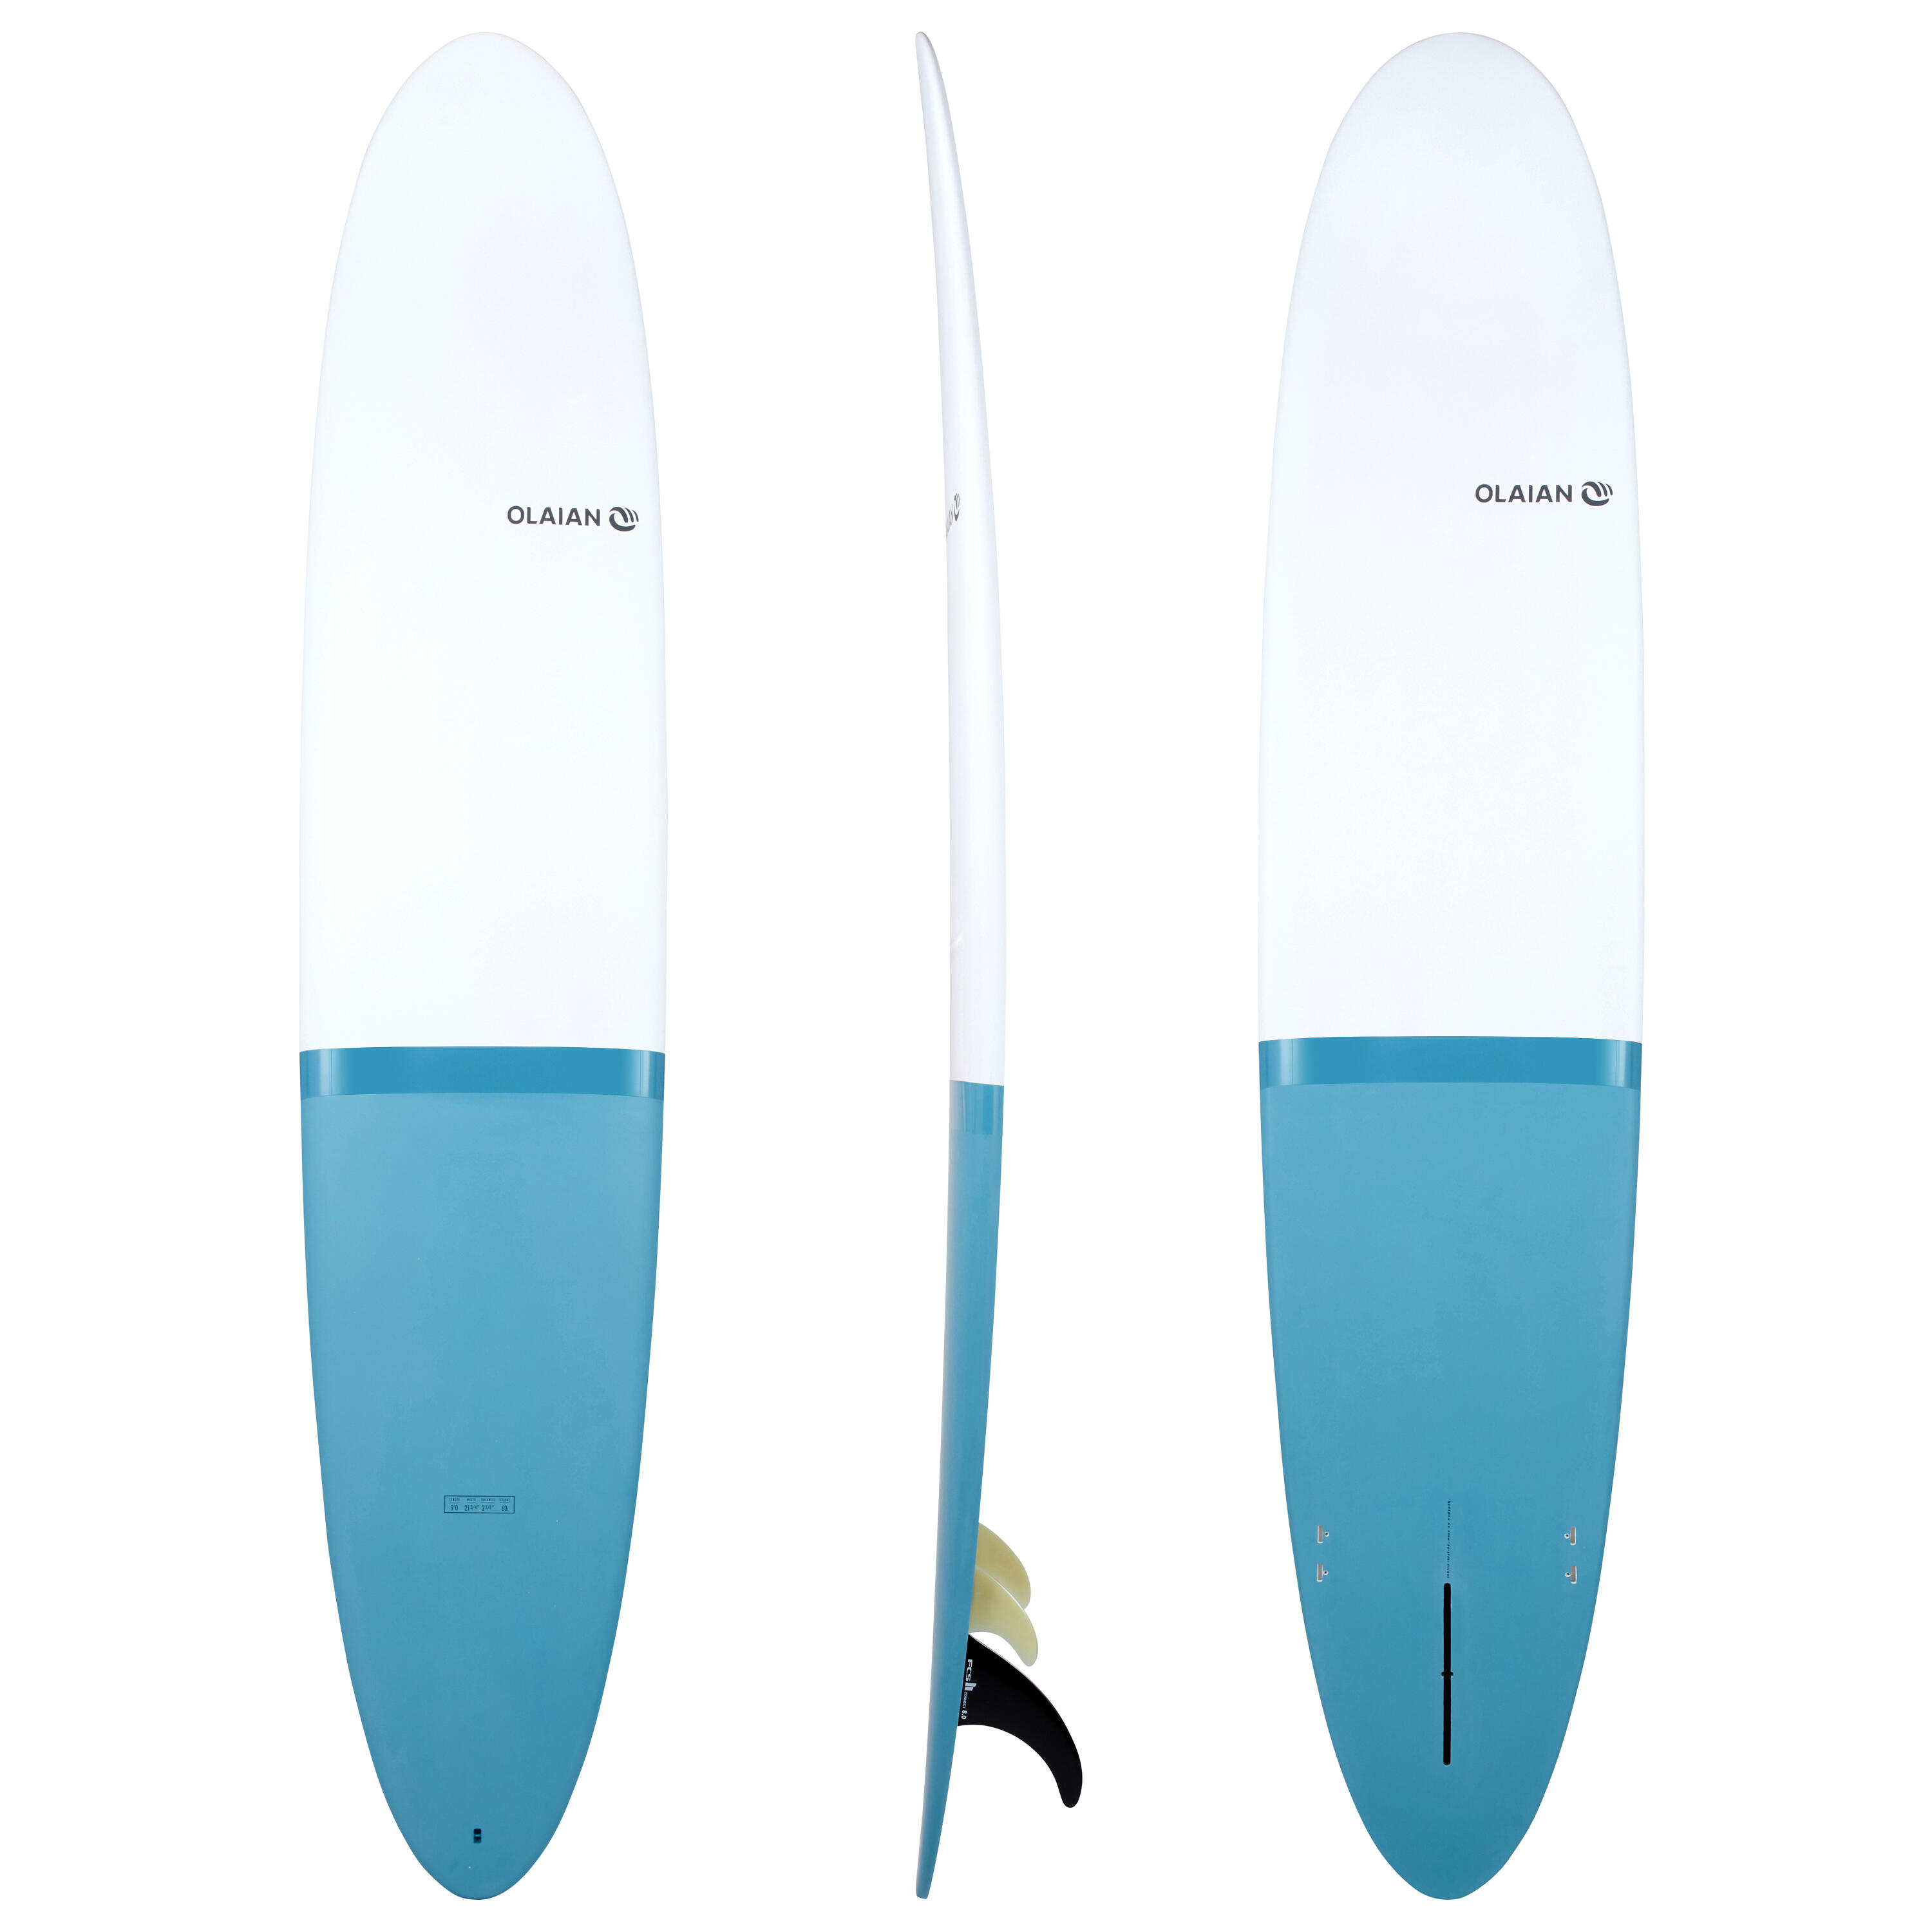 OLAIAN SURFBOARD LONGBOARD 900 Performance 9'. Comes with 2+1 fins.